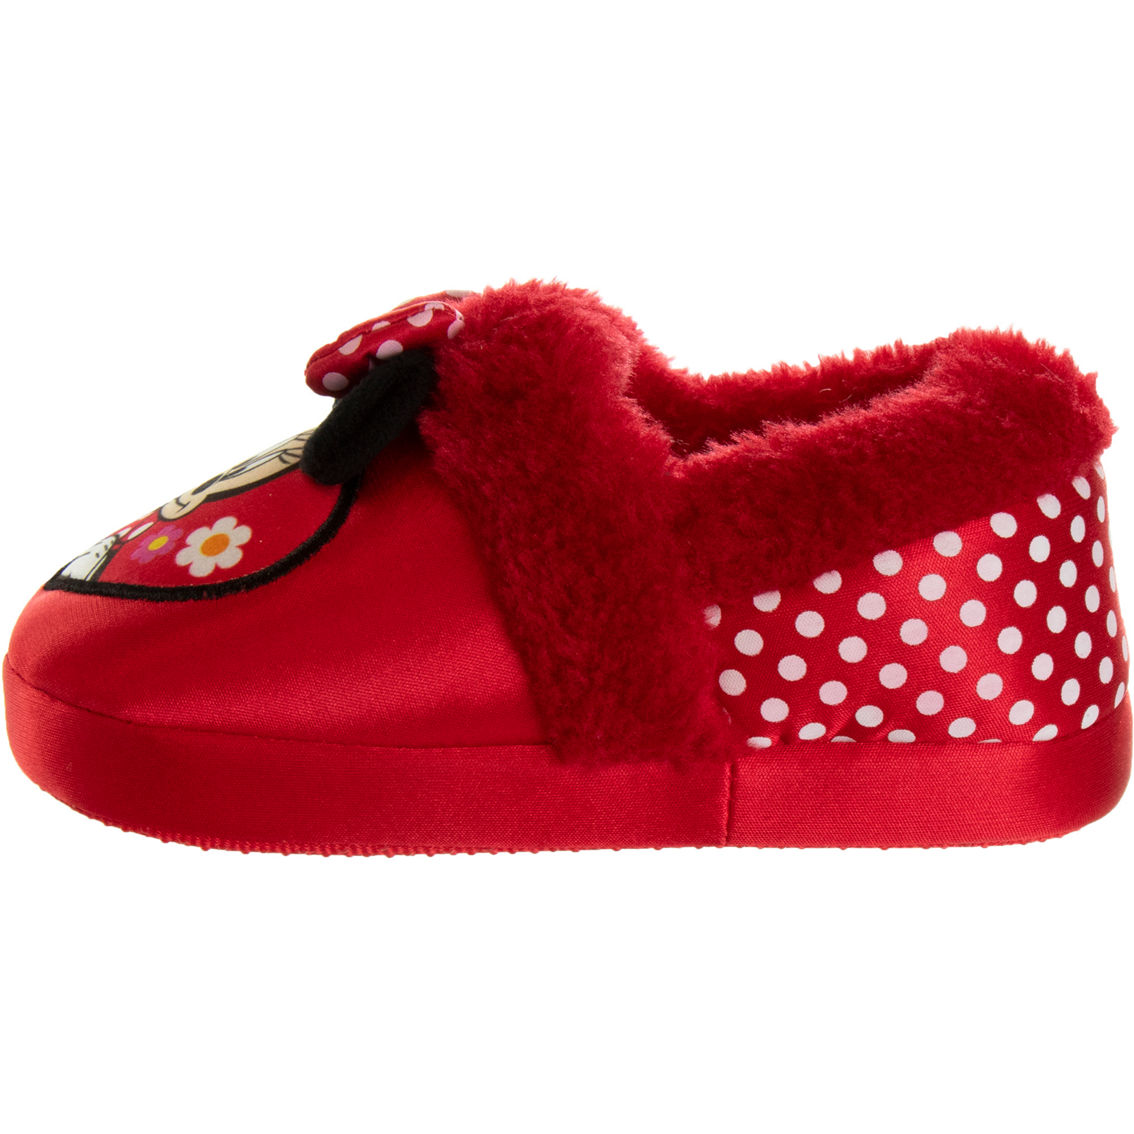 Disney Minnie Mouse Toddler Girls Slippers - Image 3 of 5